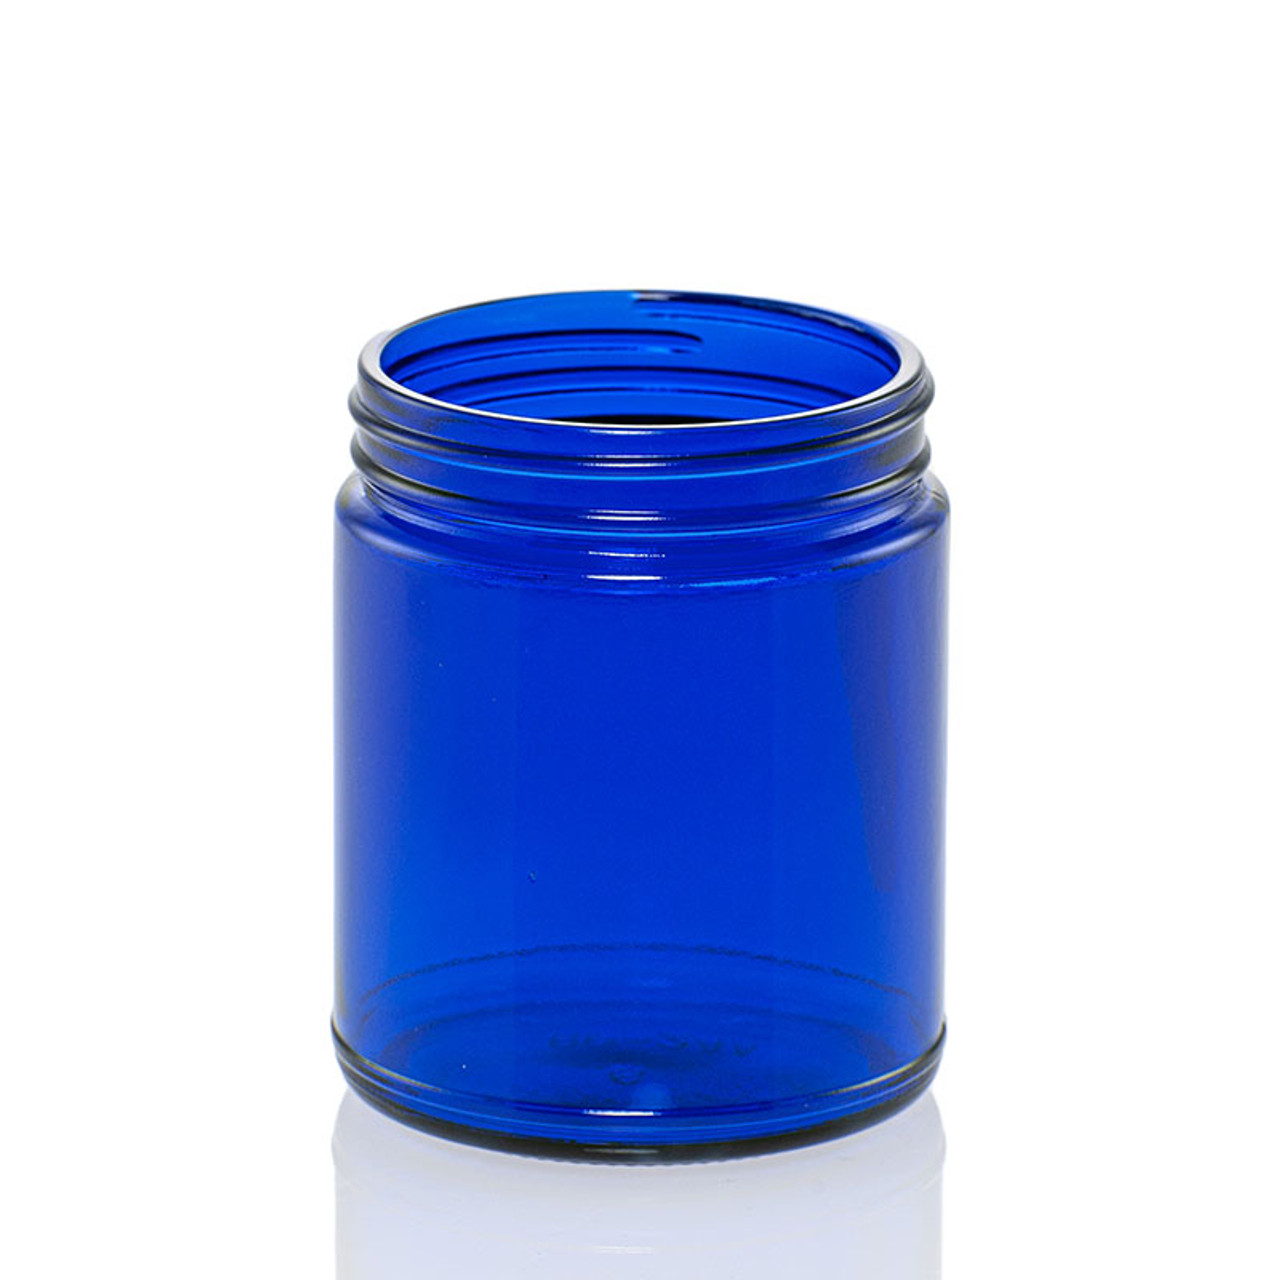 https://cdn11.bigcommerce.com/s-znjh1s2dil/images/stencil/1280w/products/451/844/blue-candle-jar__35965.1687551225.jpg